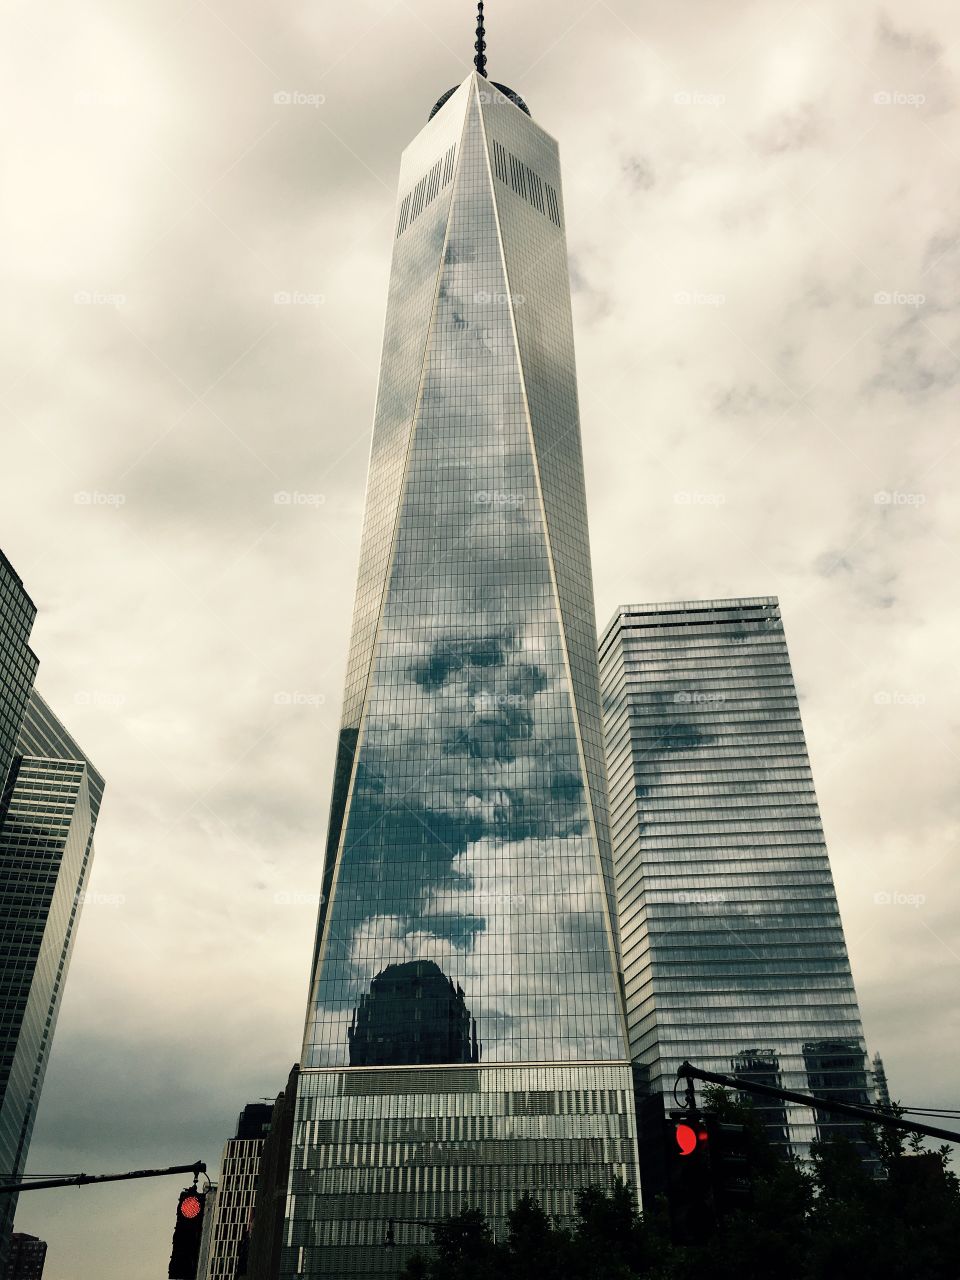 Freedom tower